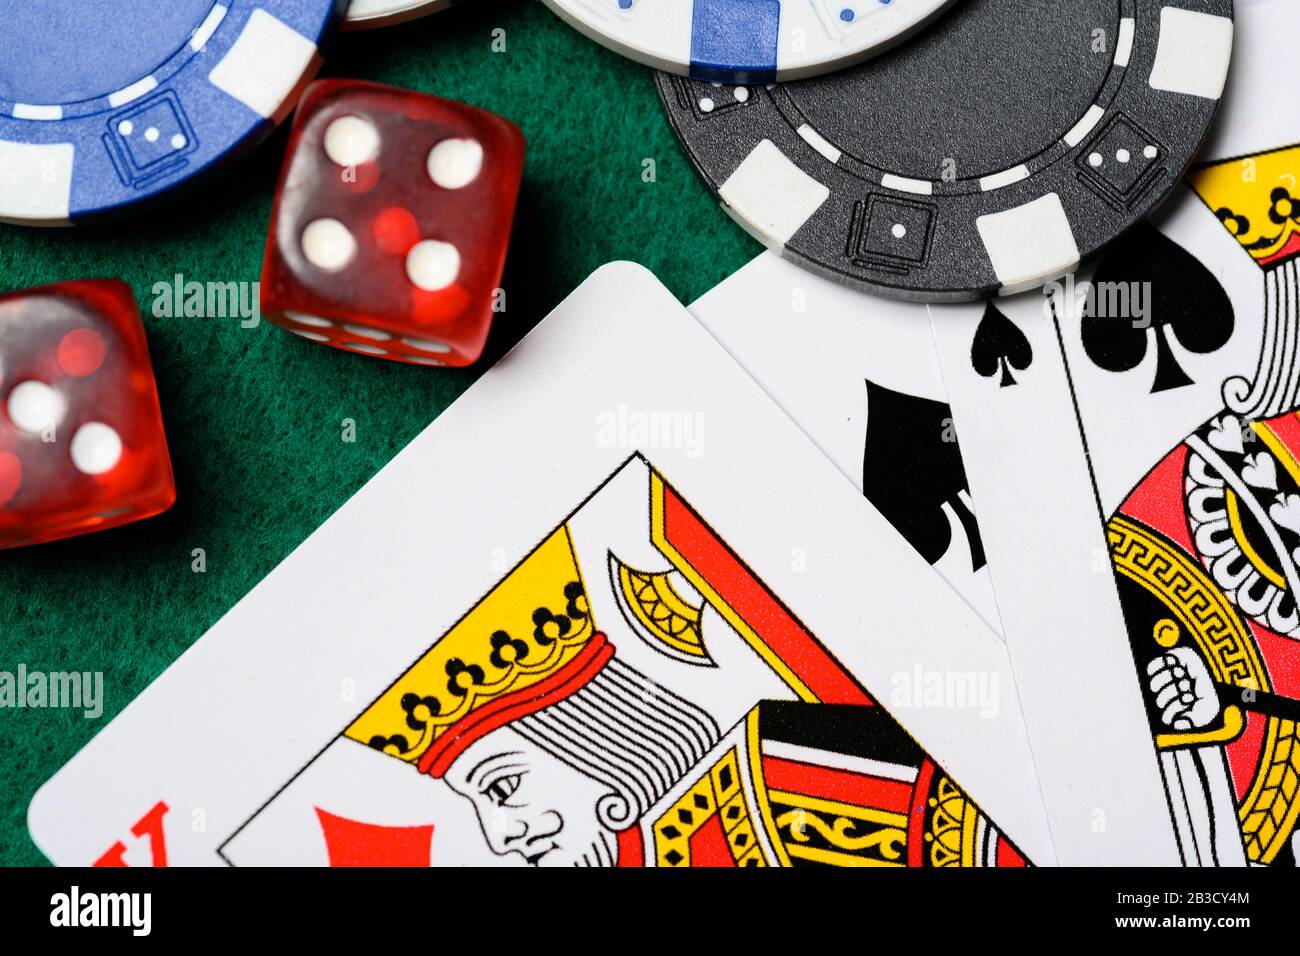 Poker chips, playing cards and dice on a green backgrorund. gambling Stock Photo